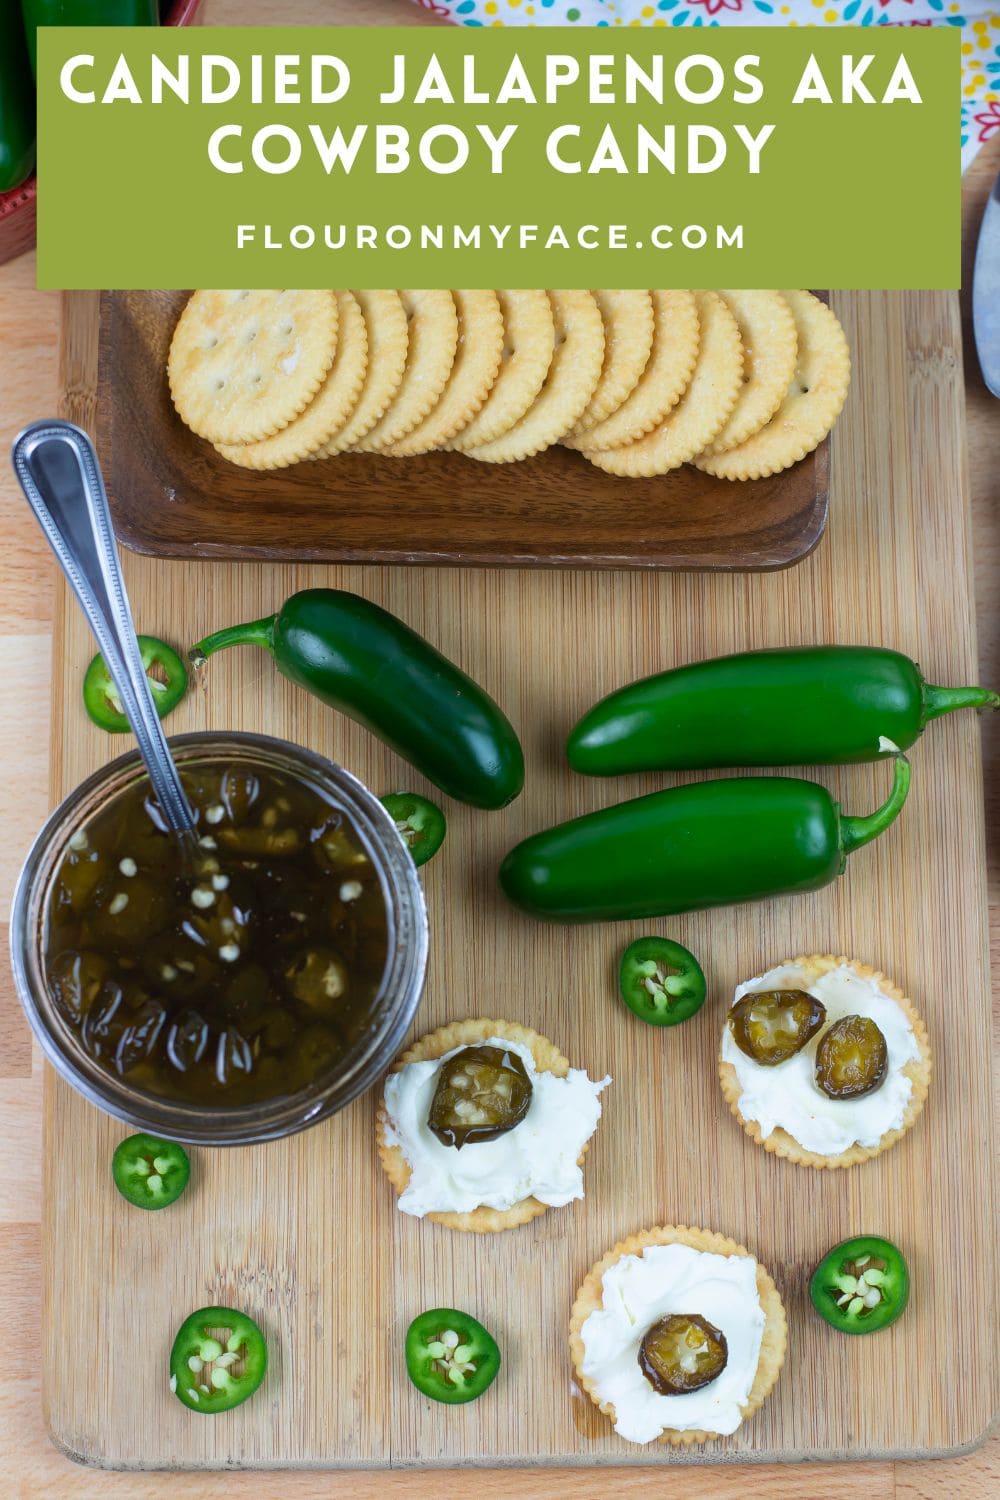 Large vertical image of candied jalapenos served with cream cheese and crackers.